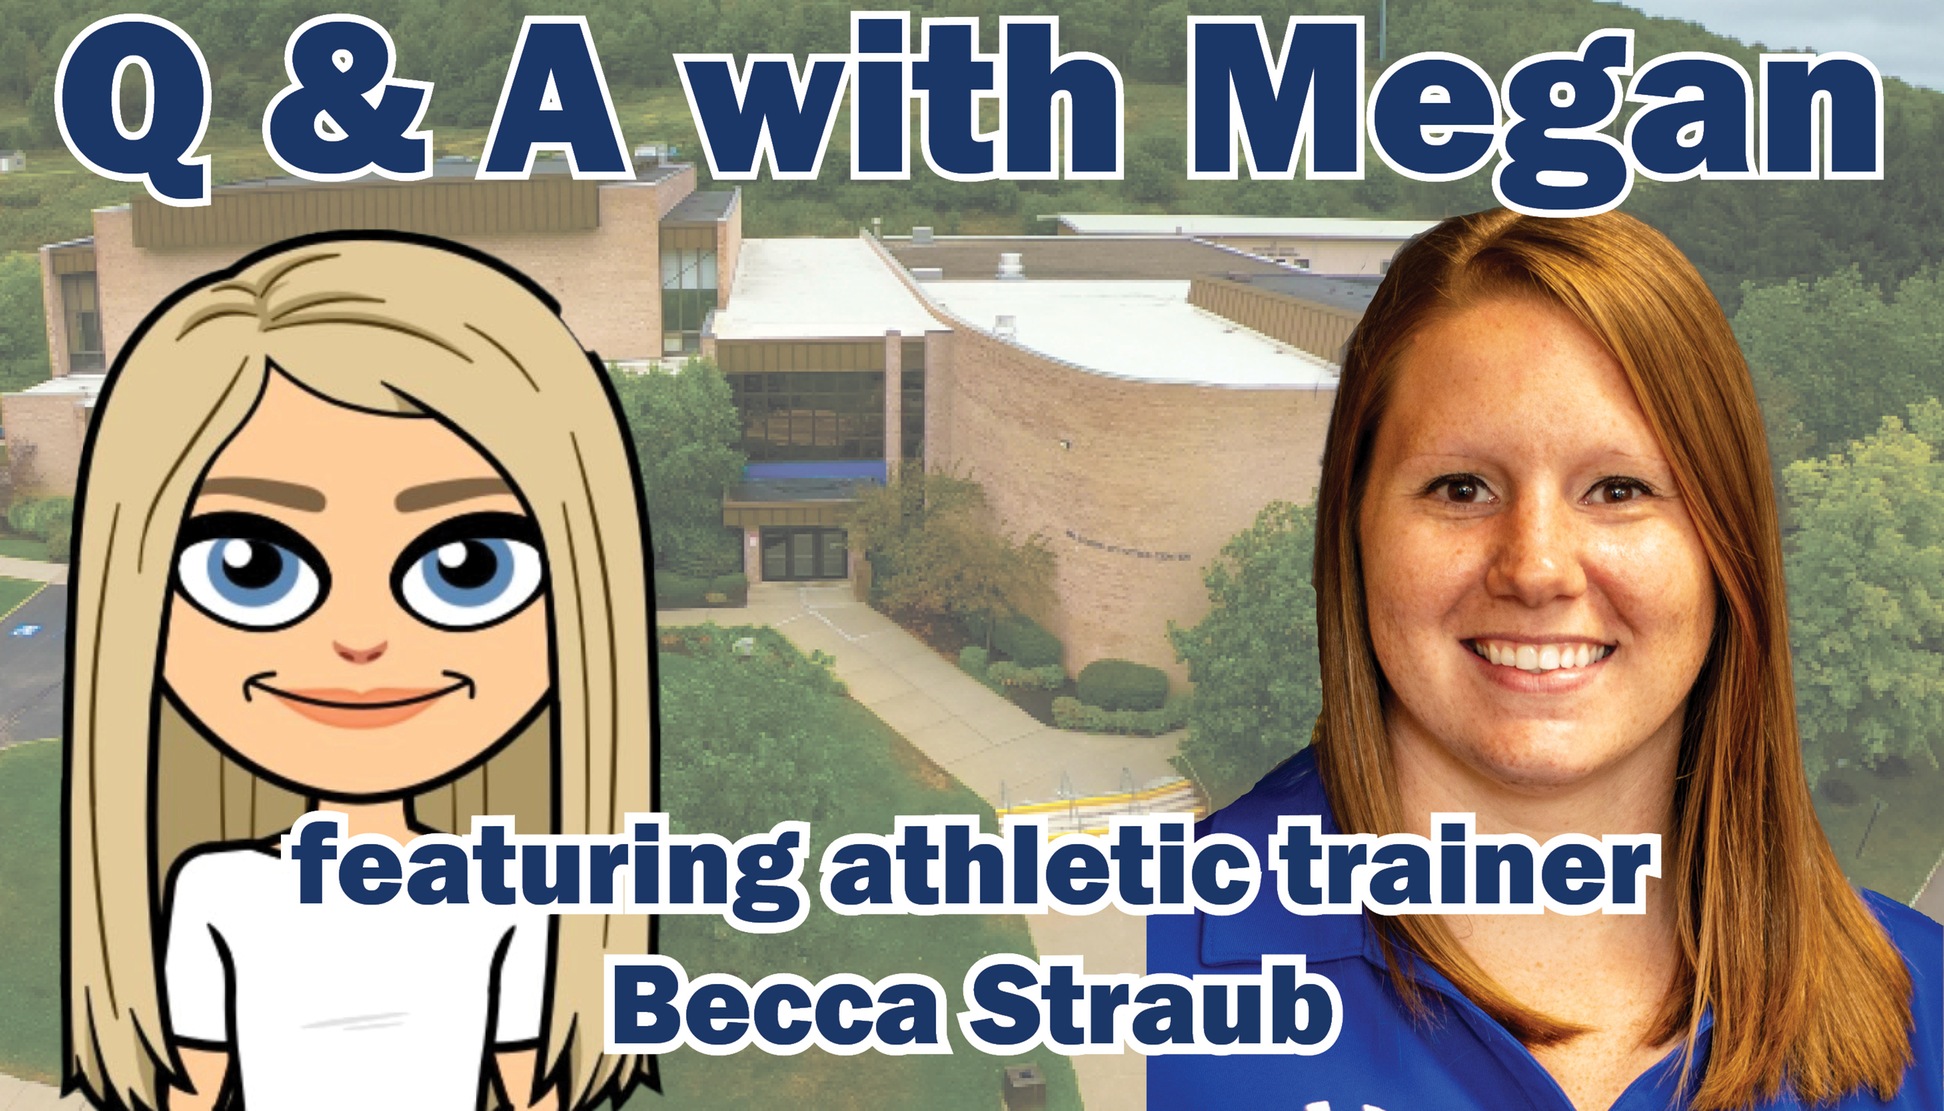 Megan Gridley sits down with Becca Straub and asks about Athletic Training and Covid-19